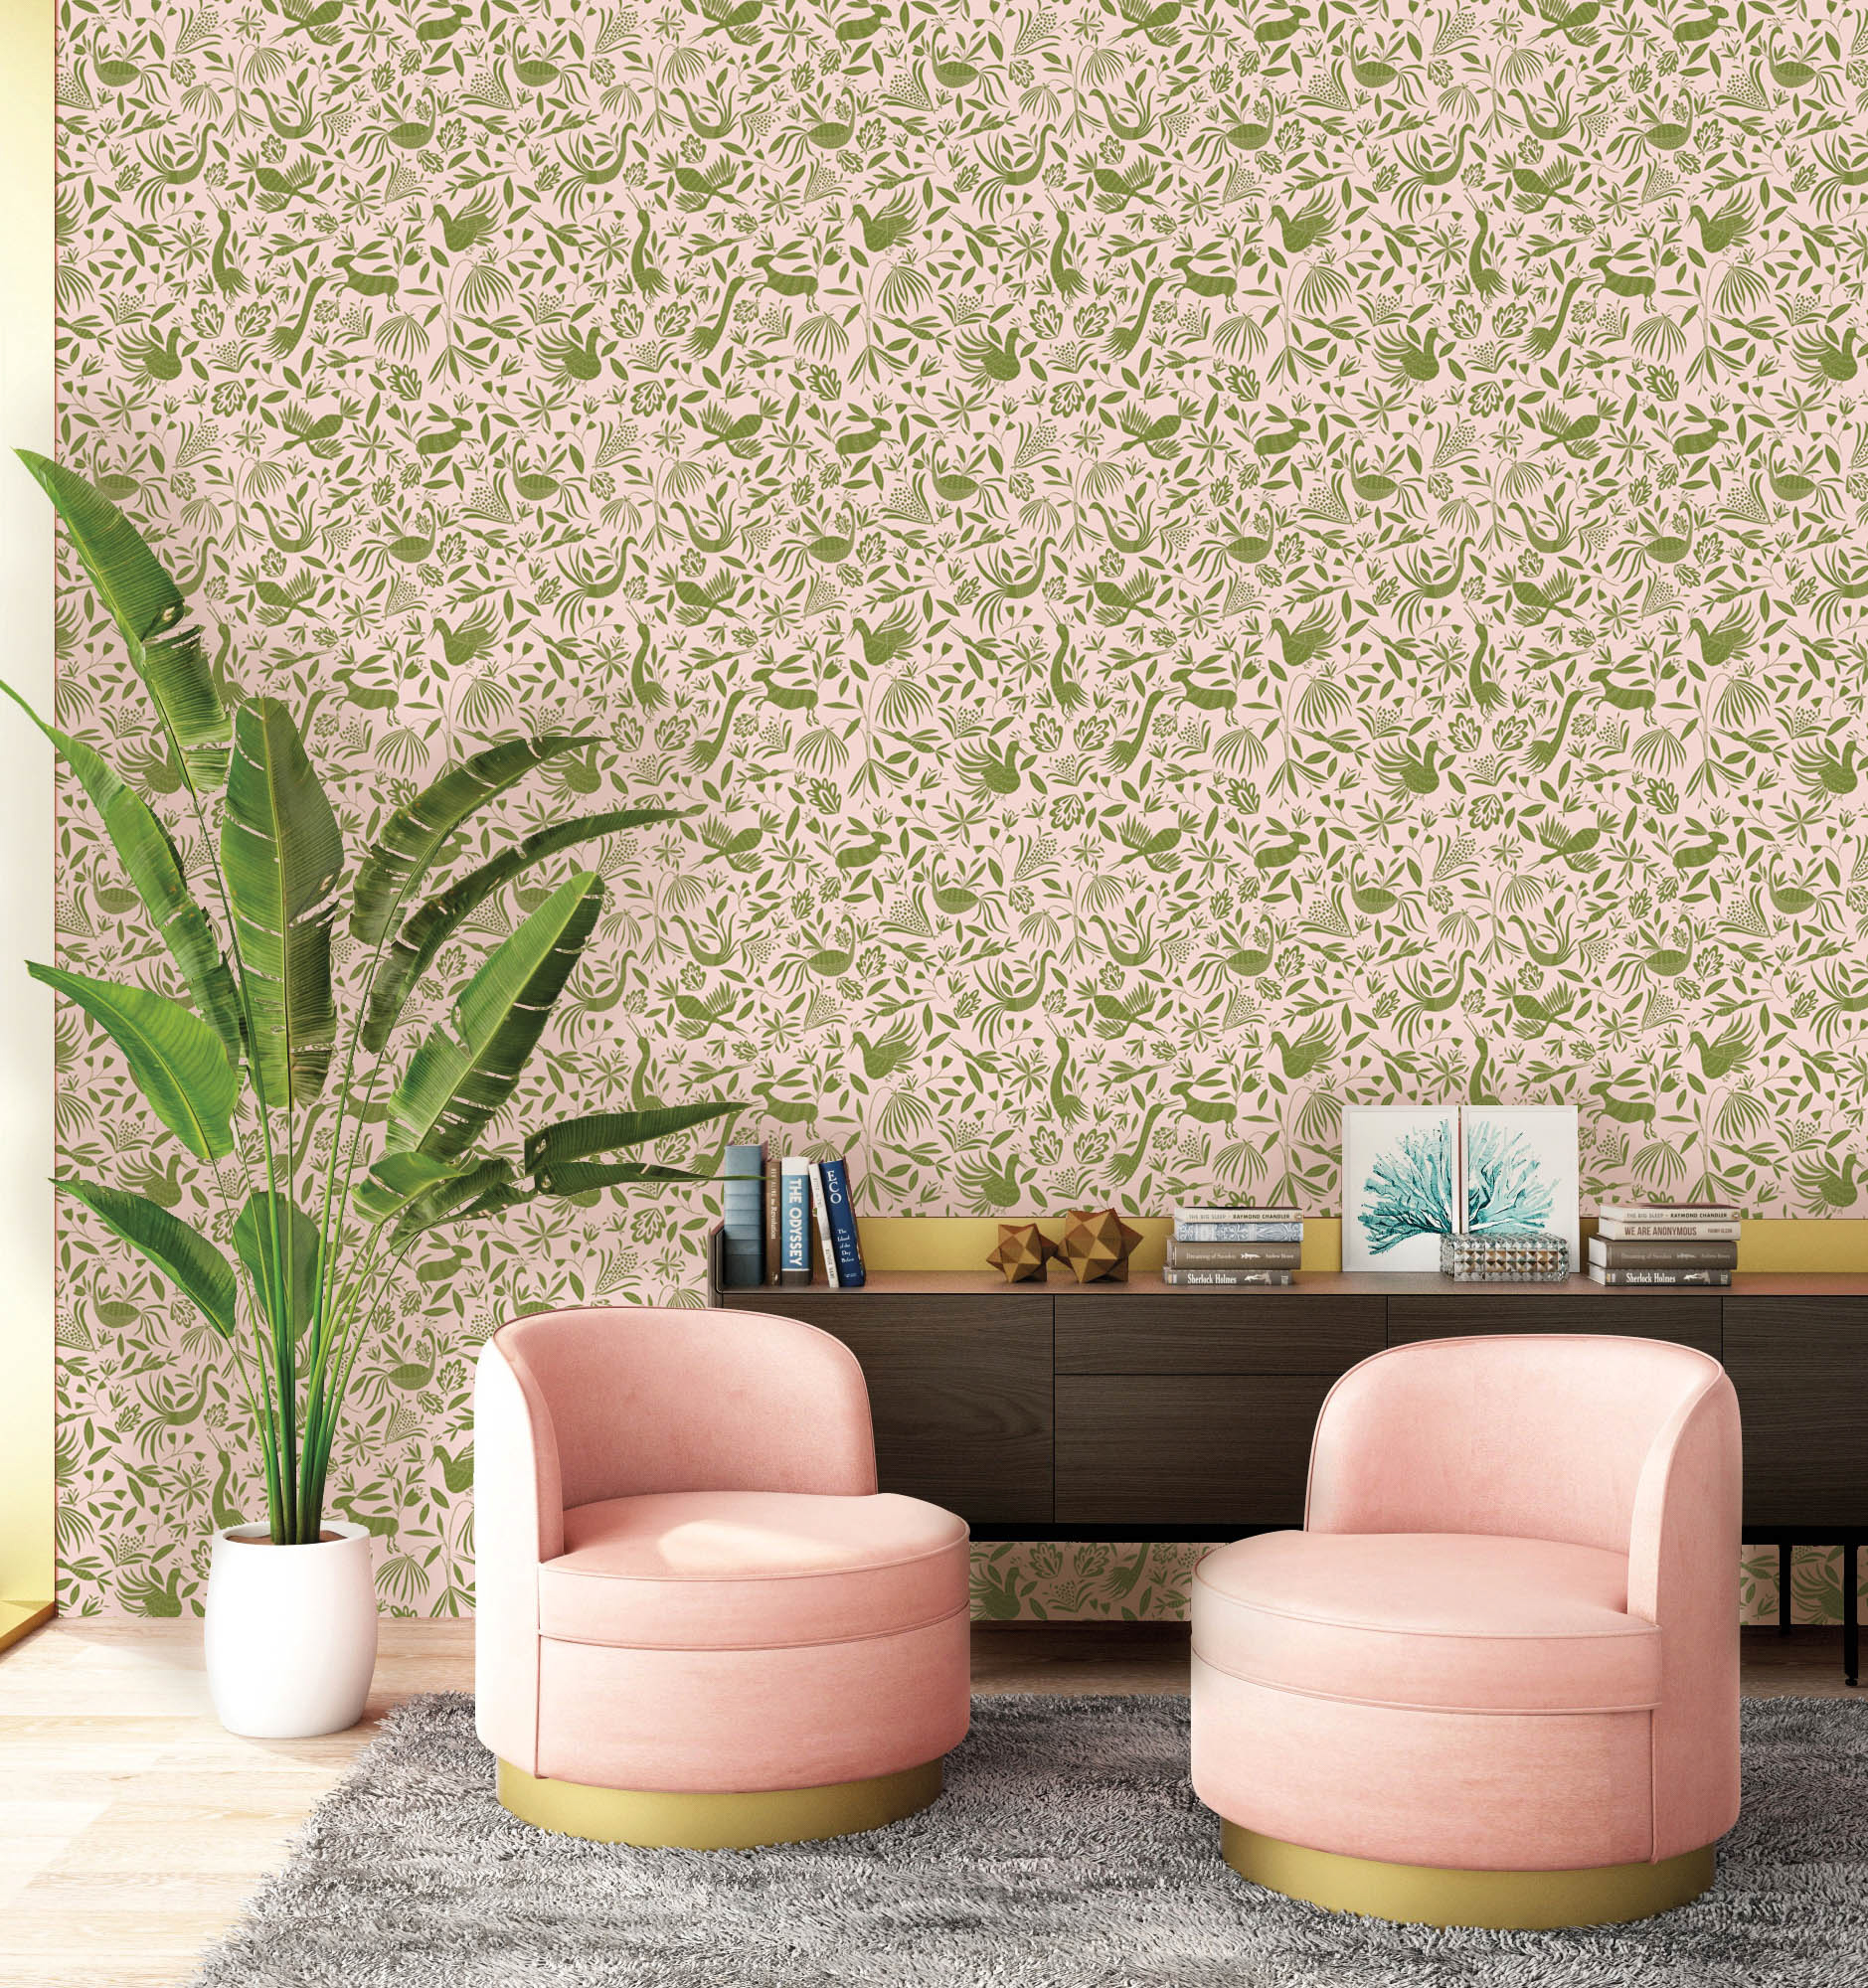 vignette of two pink chairs in front of wallpaper